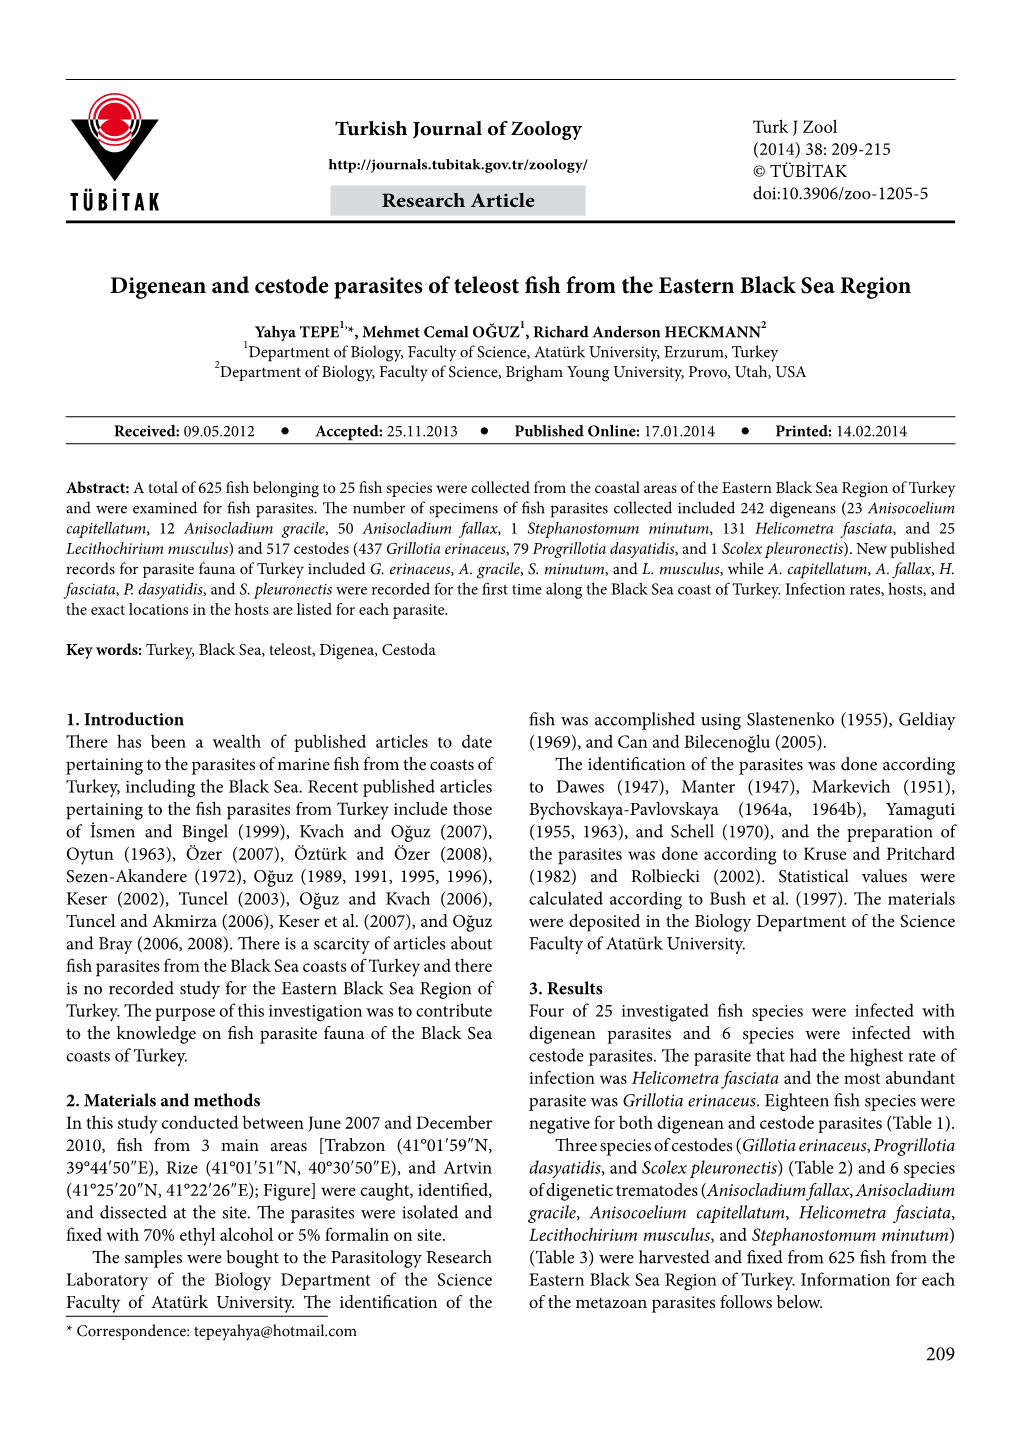 Digenean and Cestode Parasites of Teleost Fish from the Eastern Black Sea Region